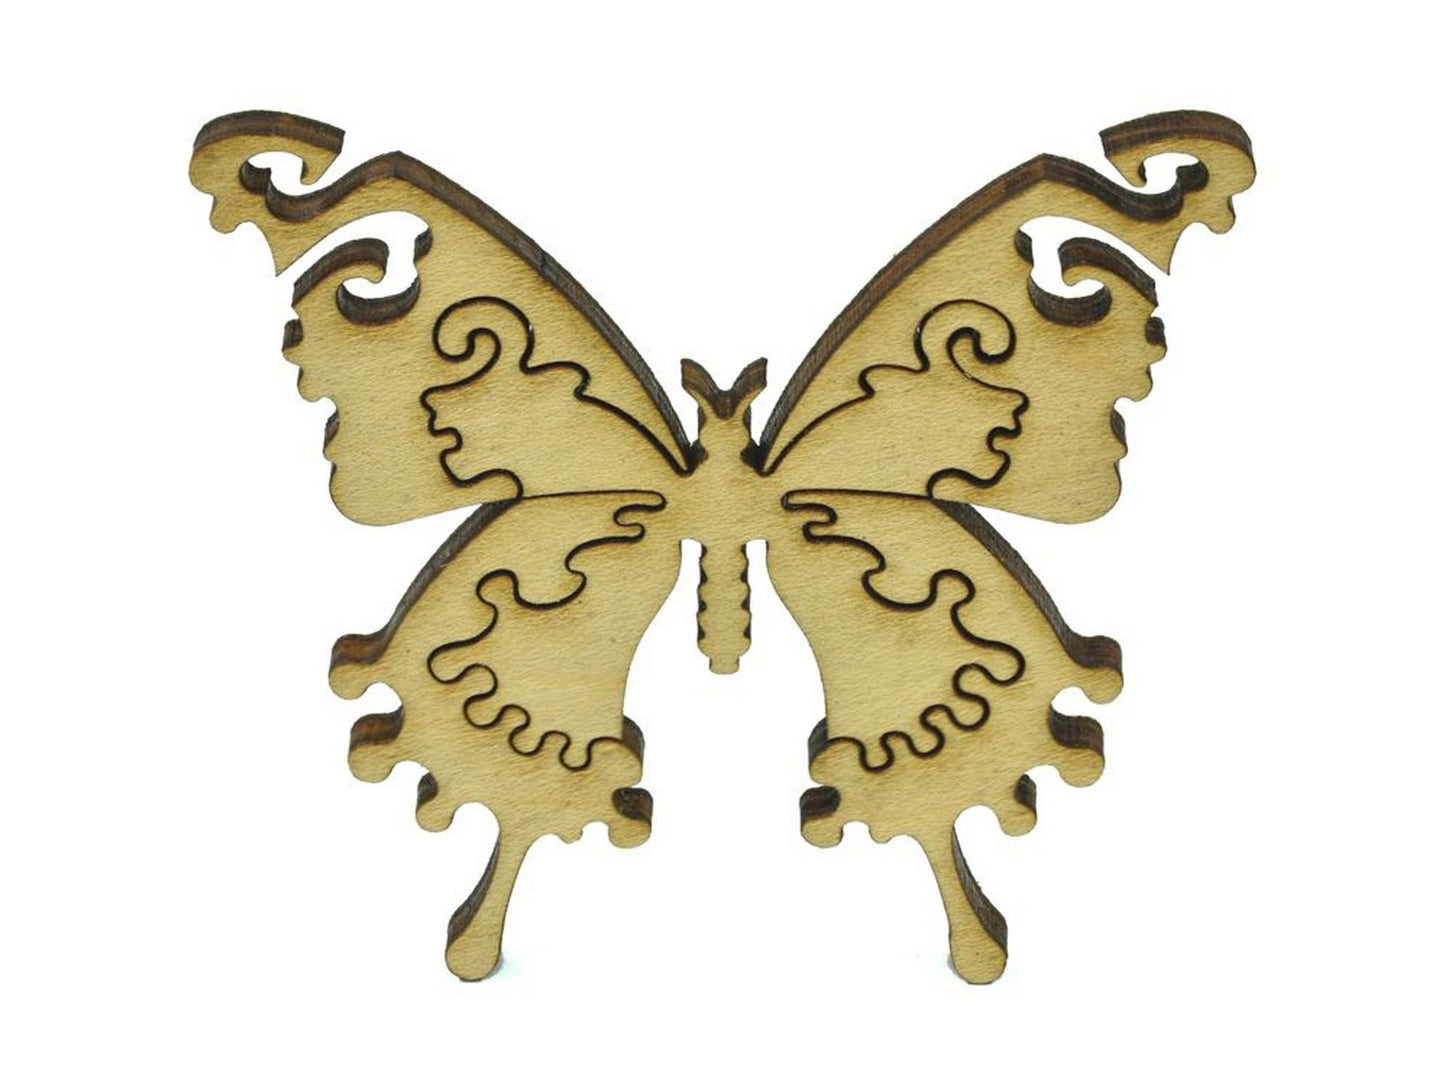 A closeup of pieces in the shape of another butterfly.